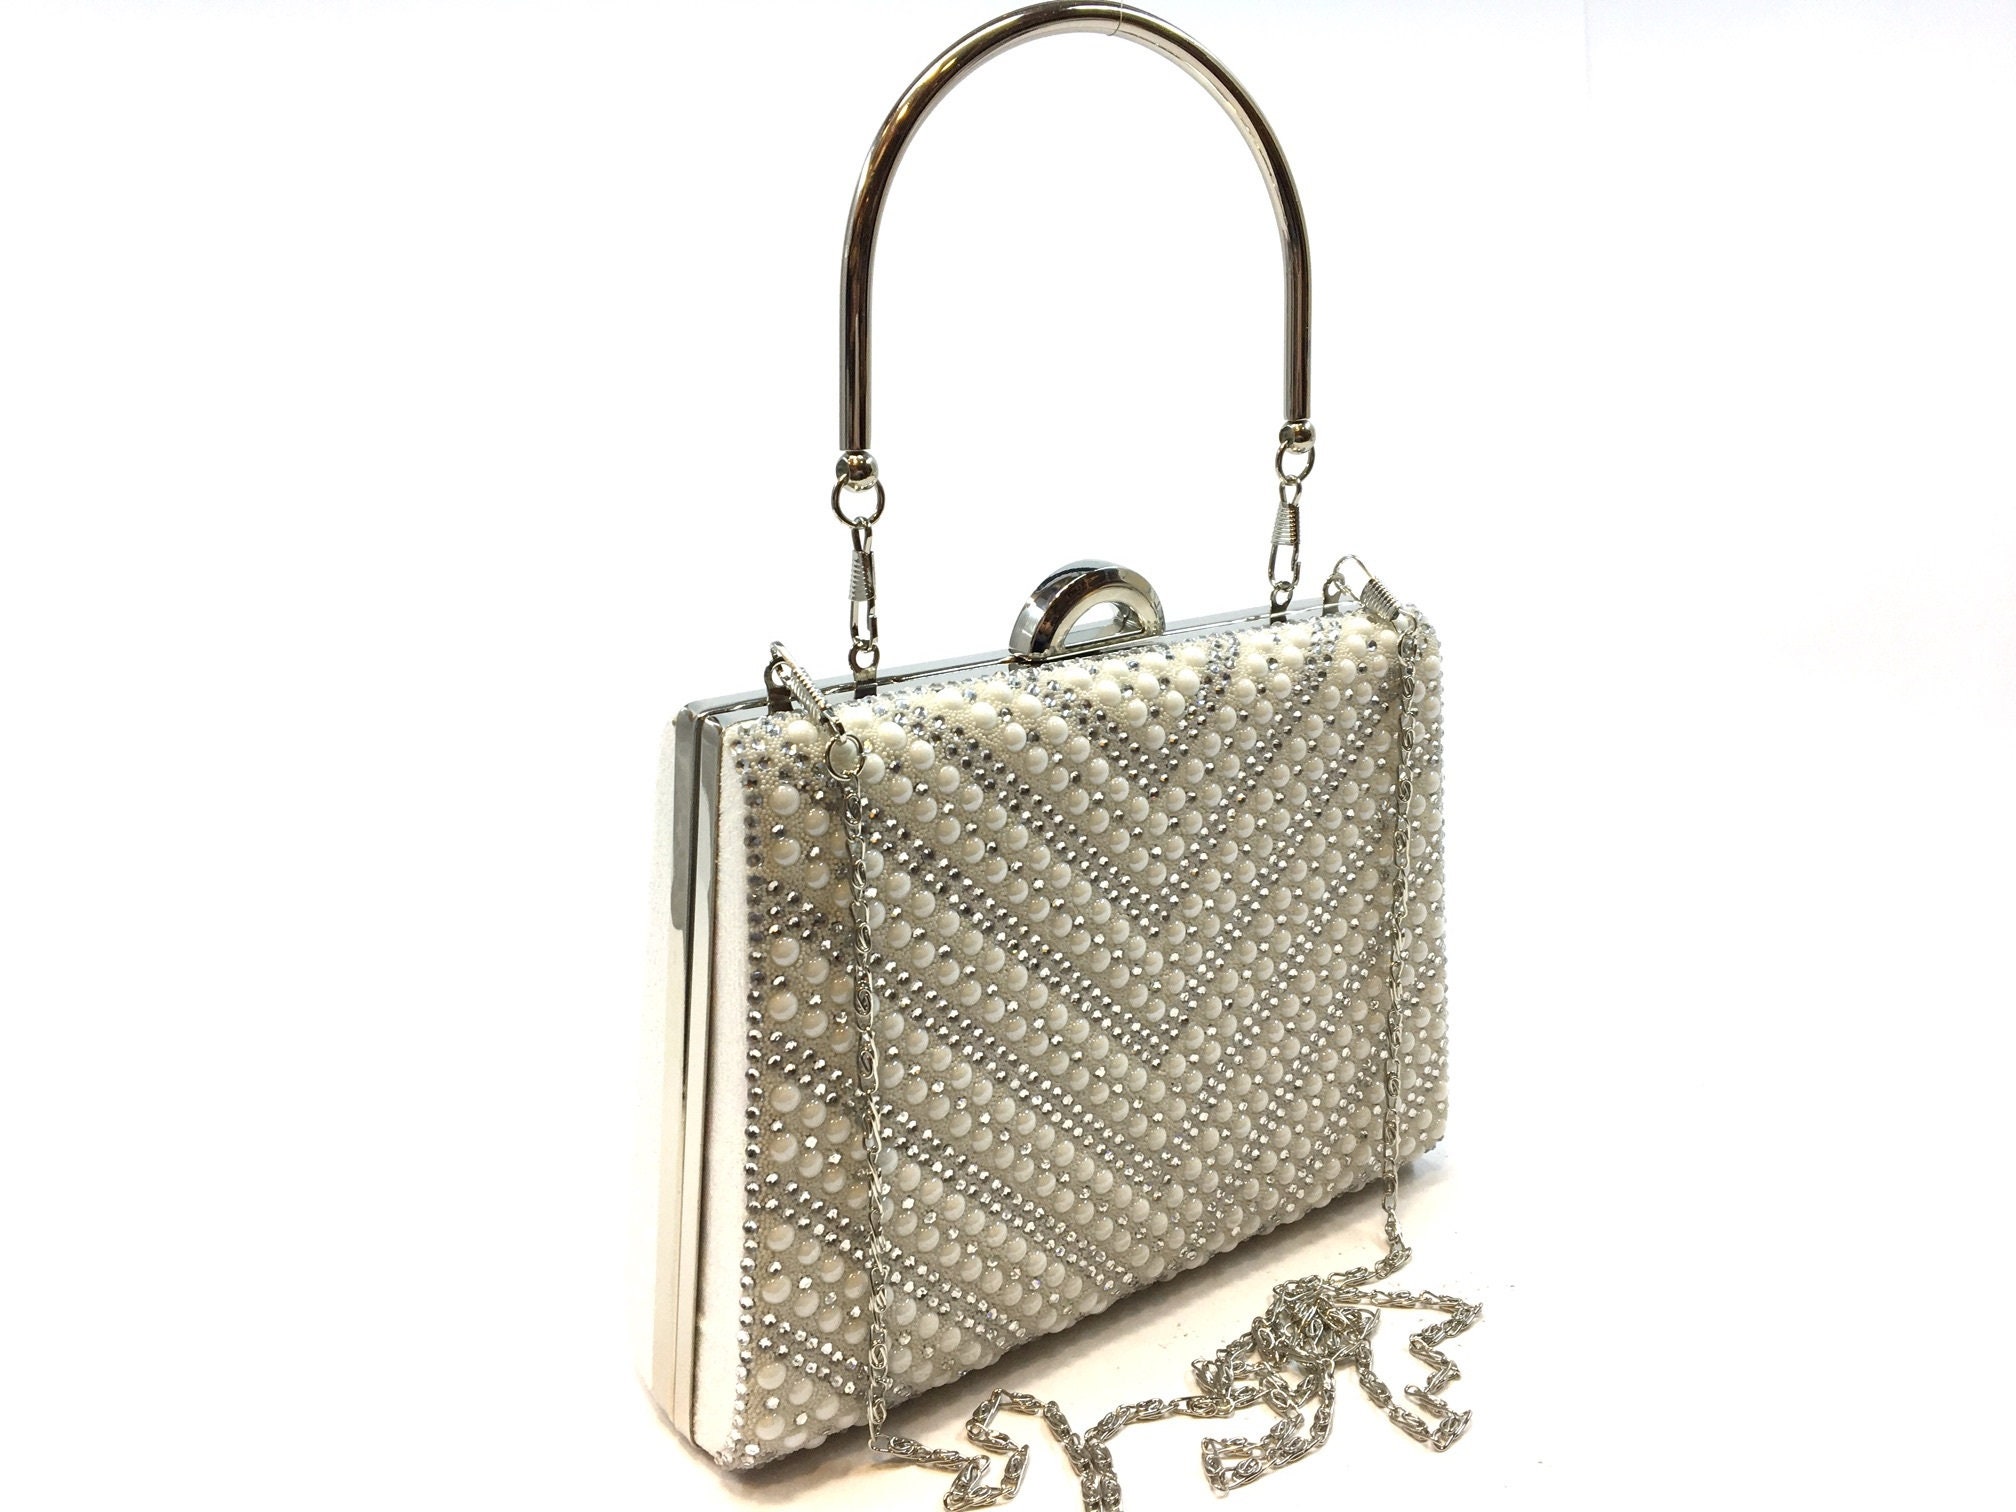 New Fashion Women Evening Bag Pearl Clutch Party Hand Bag